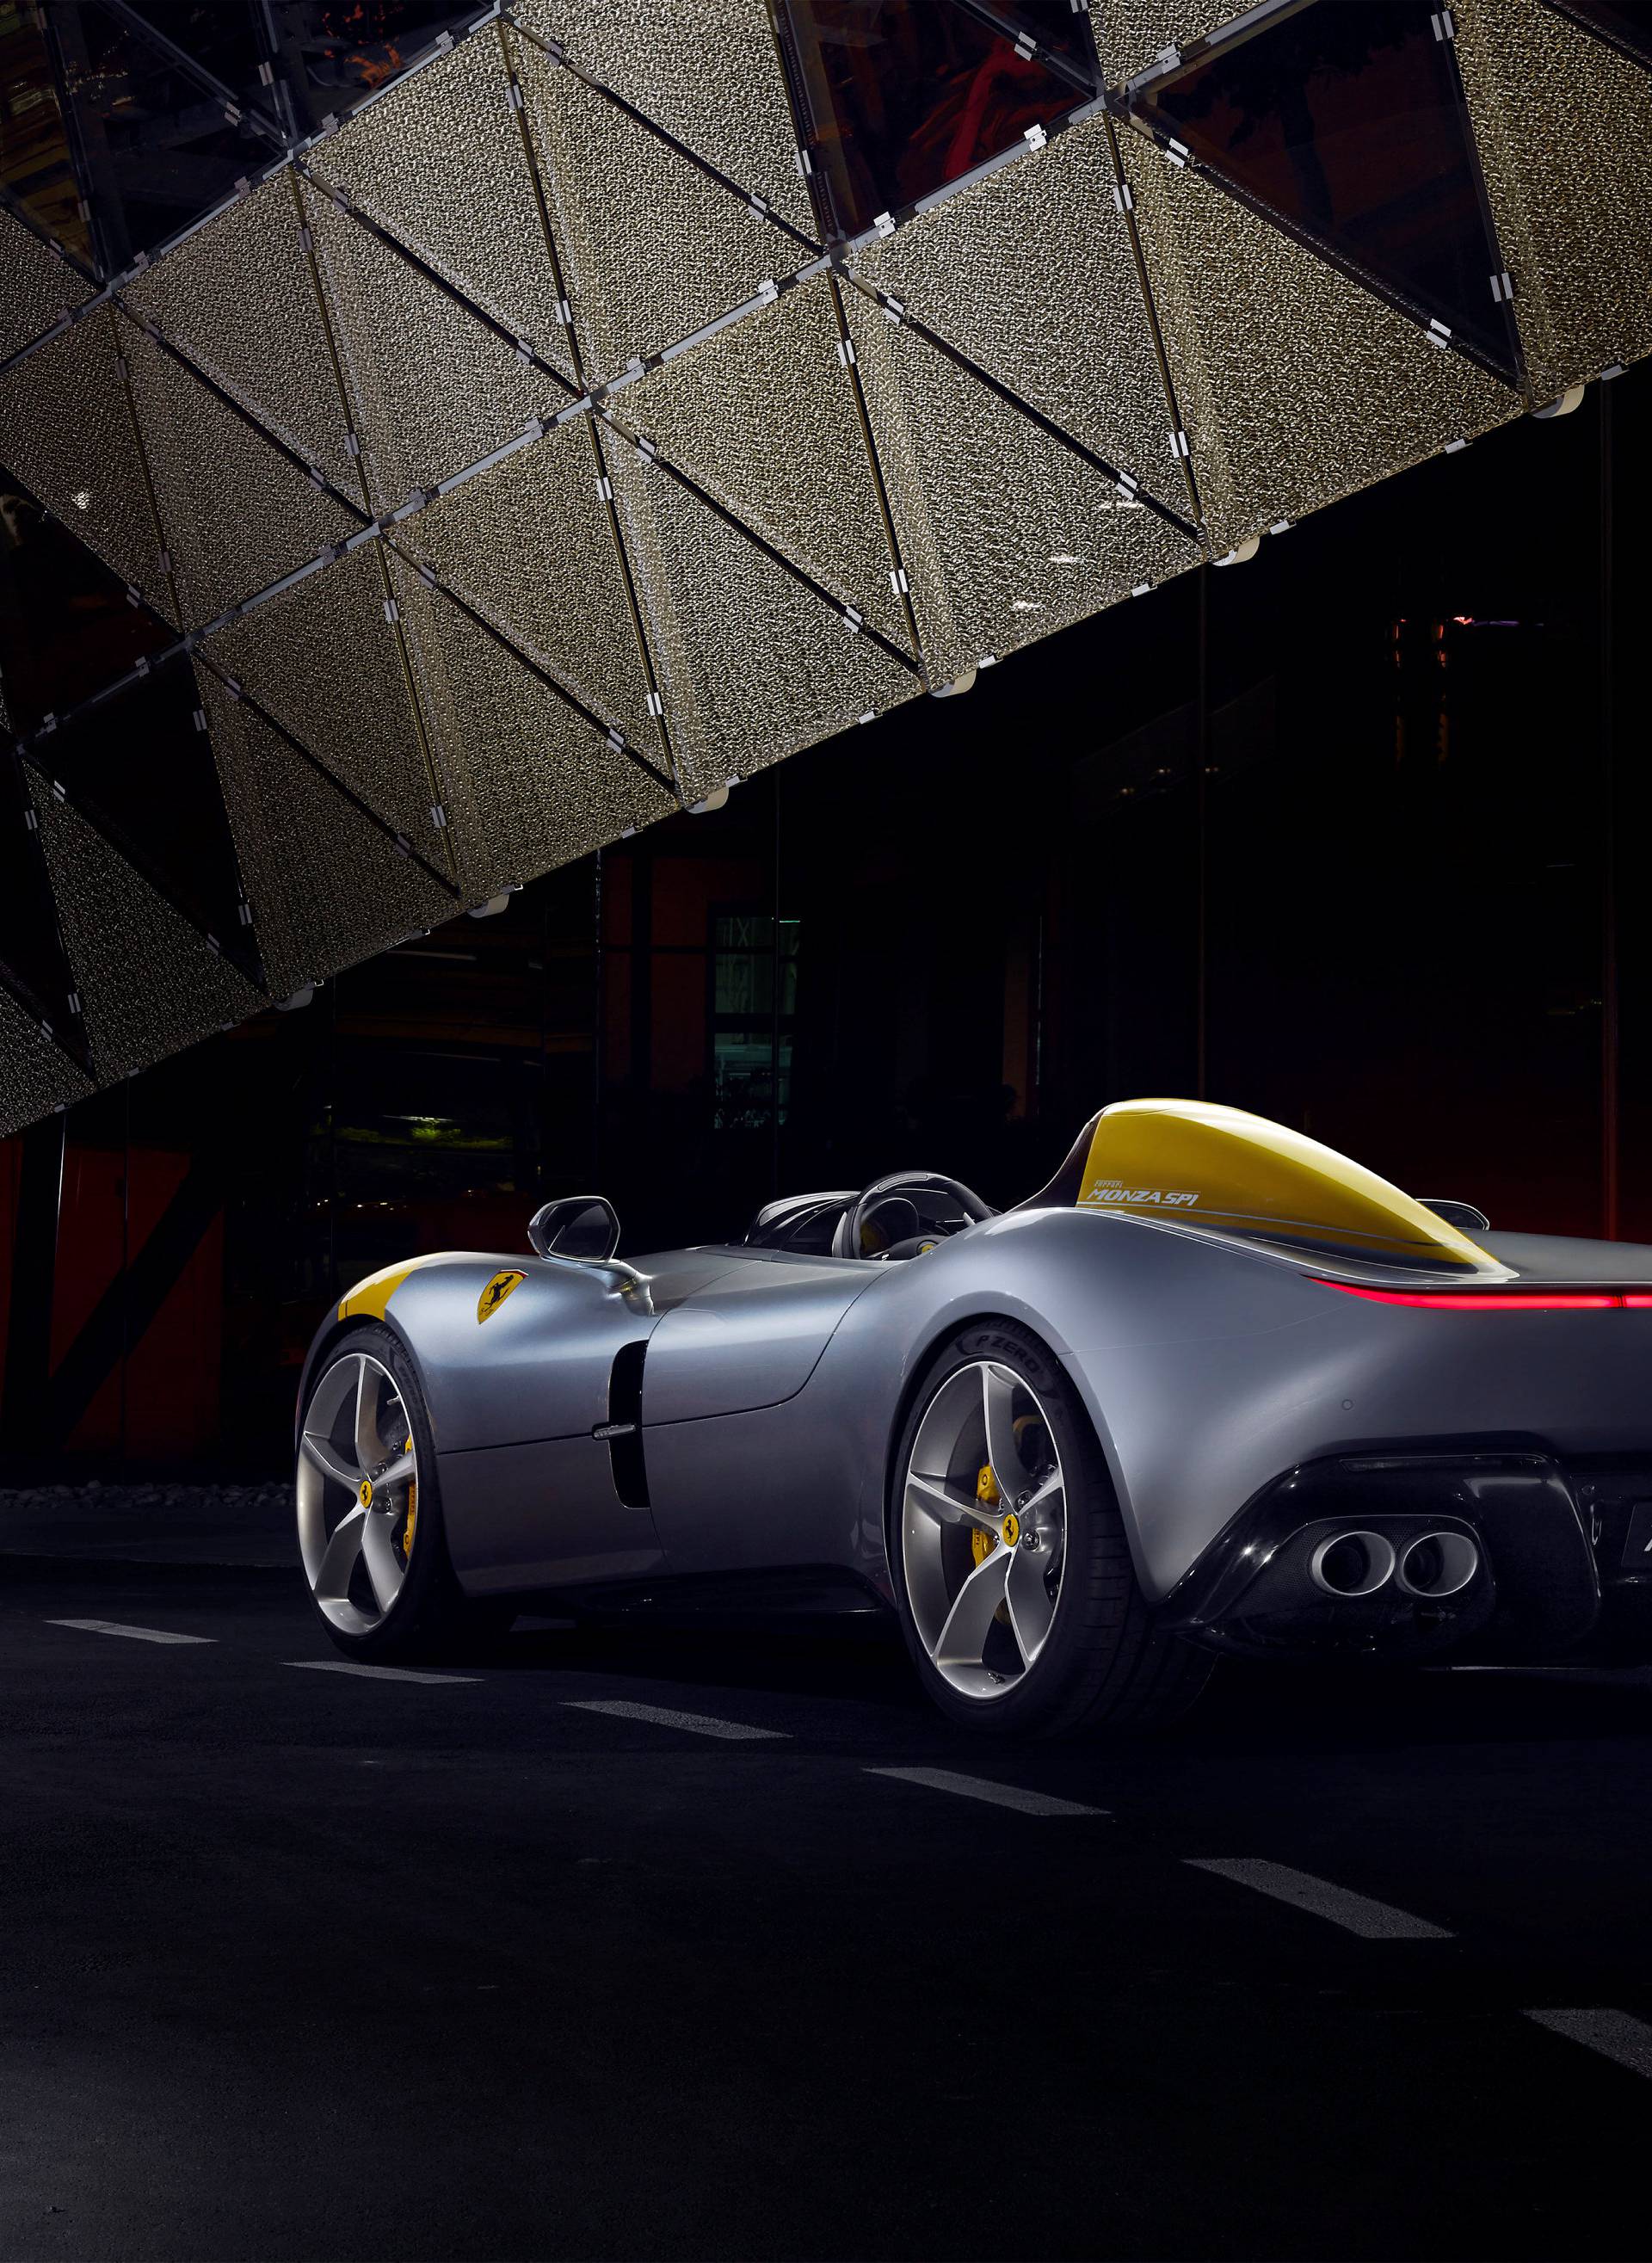 Ferrari's new Monza SP1 is seen in this picture released by Ferrari press office during a meeting in Maranello